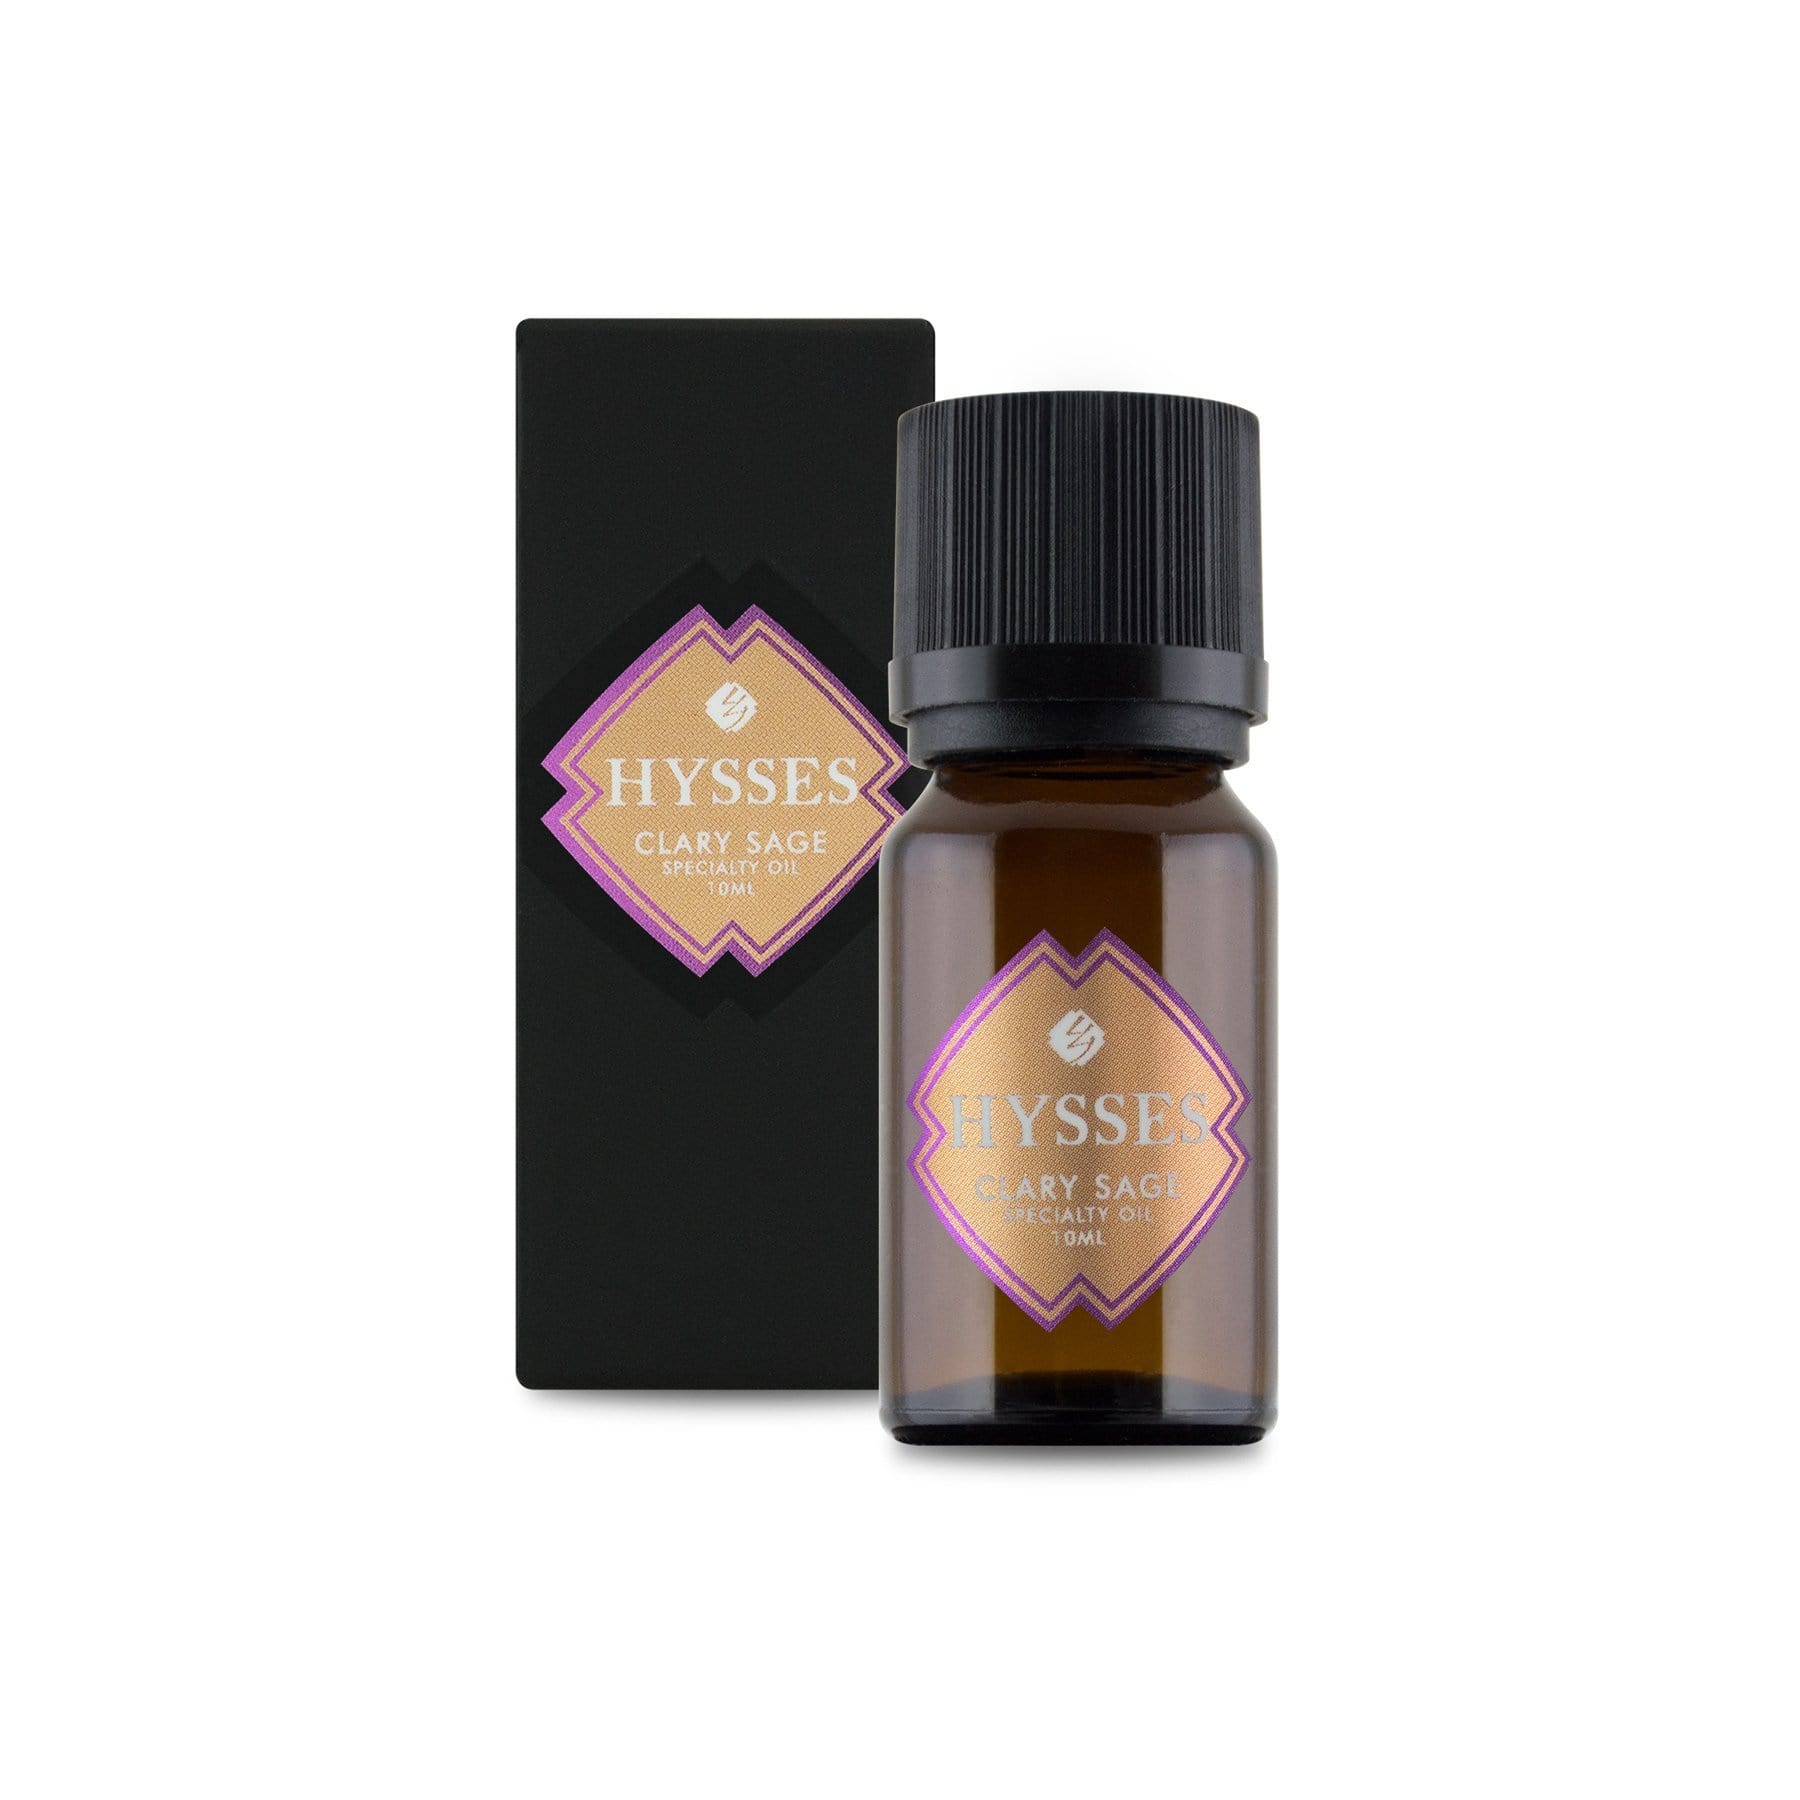 Hysses Essential Oil 10ml Specialty Oil Clary Sage